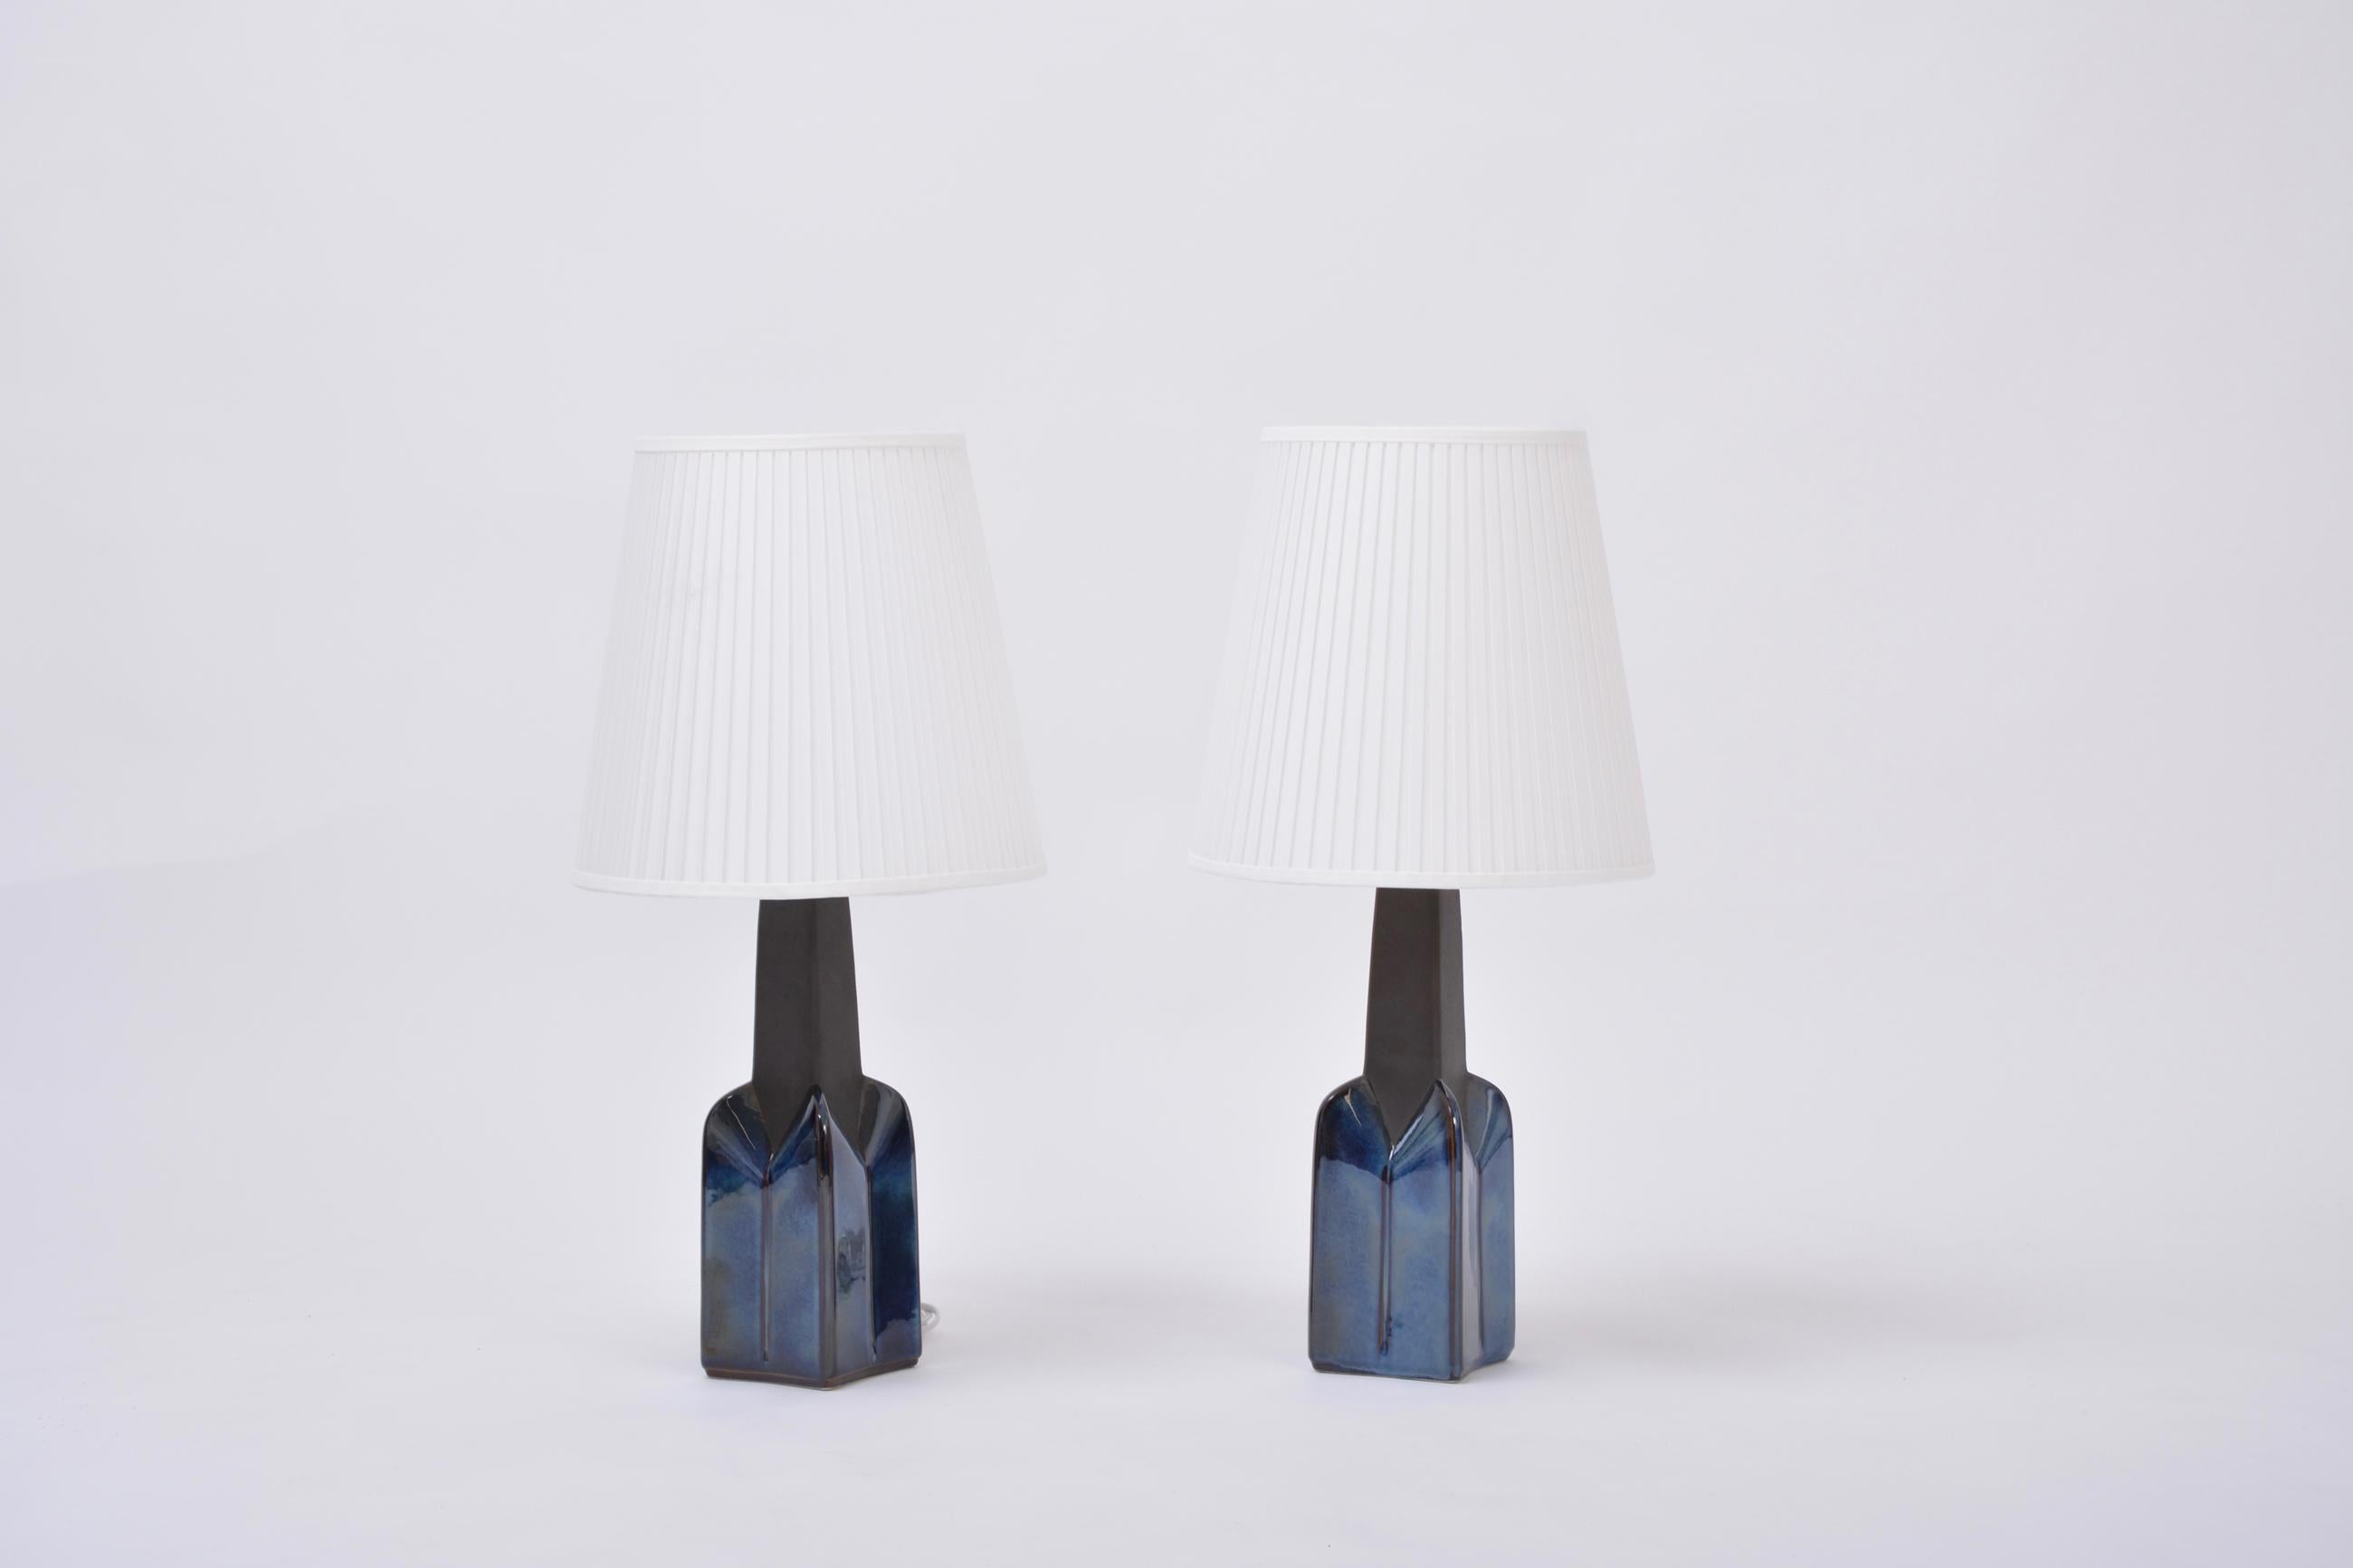 Pair of blue Mid-Century Modern stoneware lamps Model 1029 by Einar Johansen for Soholm.

Pair of tall table lamps made of stoneware with ceramic glazing in dark blue. Beautiful graphic shape of the base of the lamp. Designed by Einar Johansen and